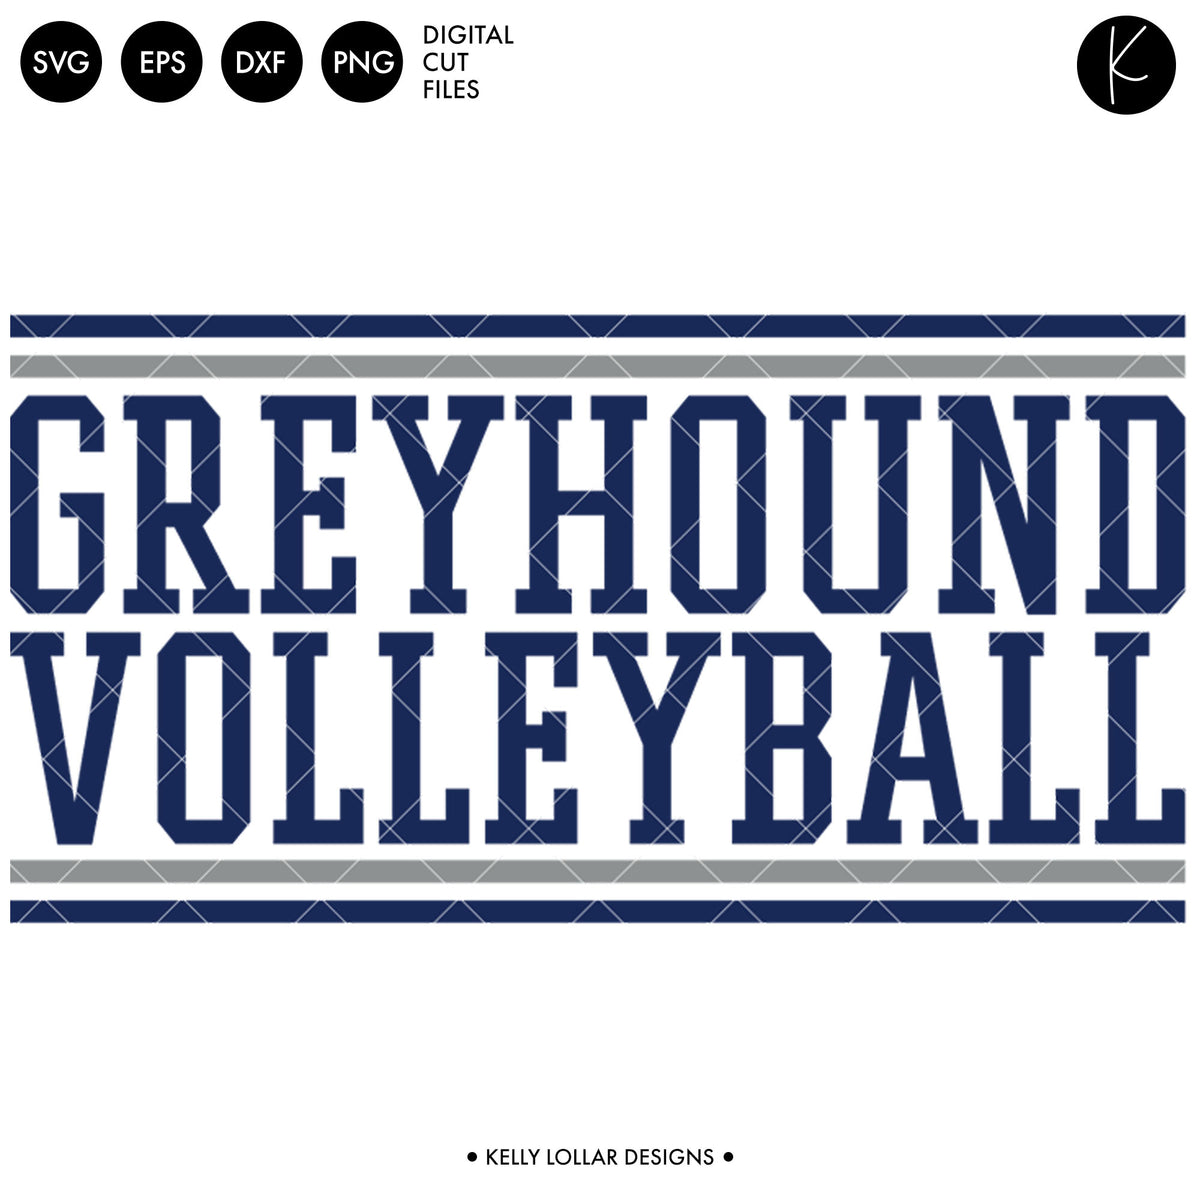 Greyhounds Volleyball Bundle | SVG DXF EPS PNG Cut Files